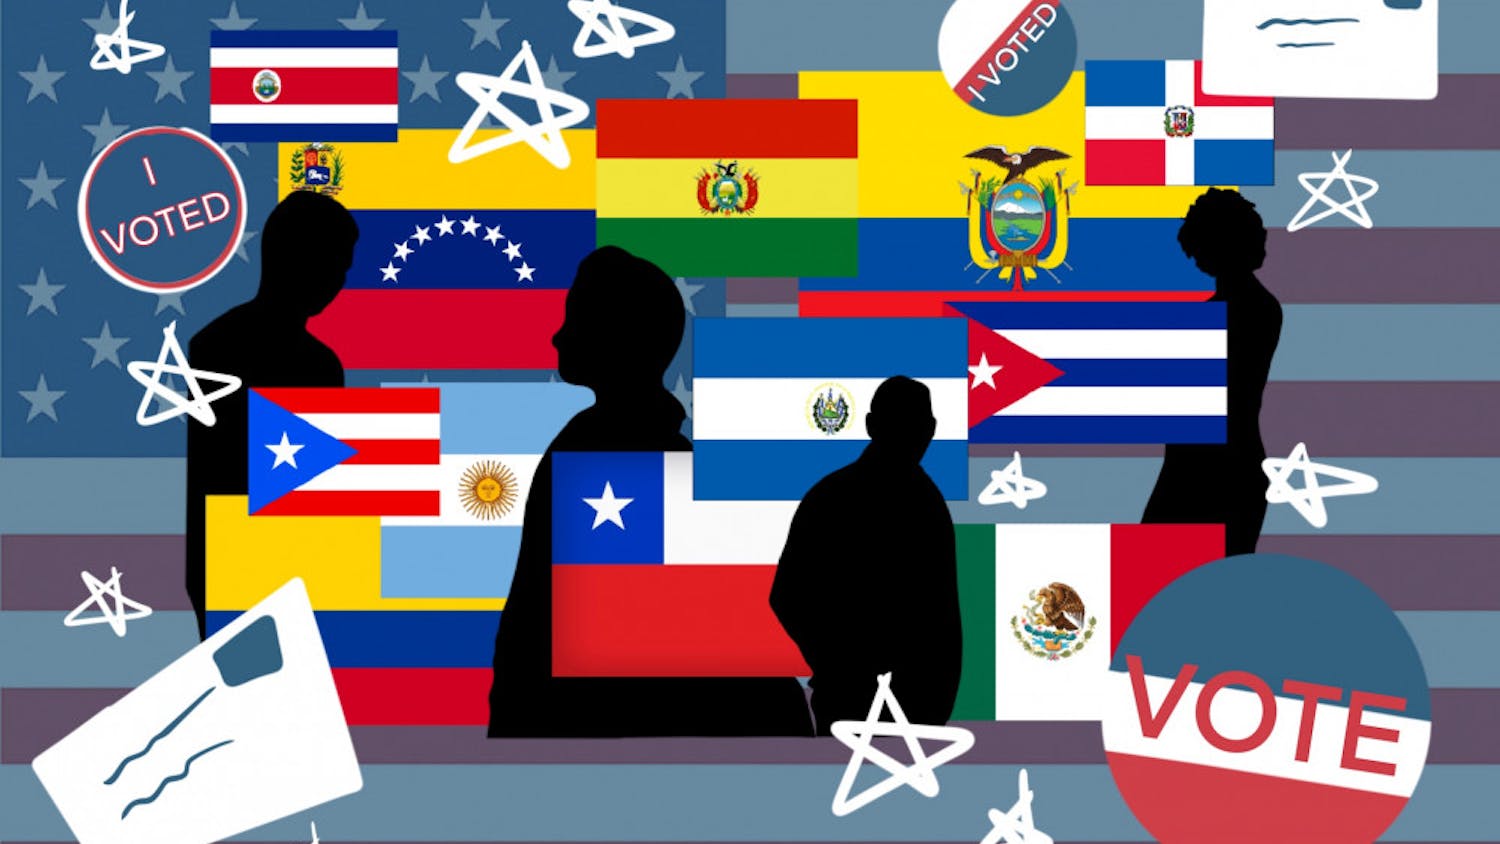 Graphic of Latin and Hispanic country flags